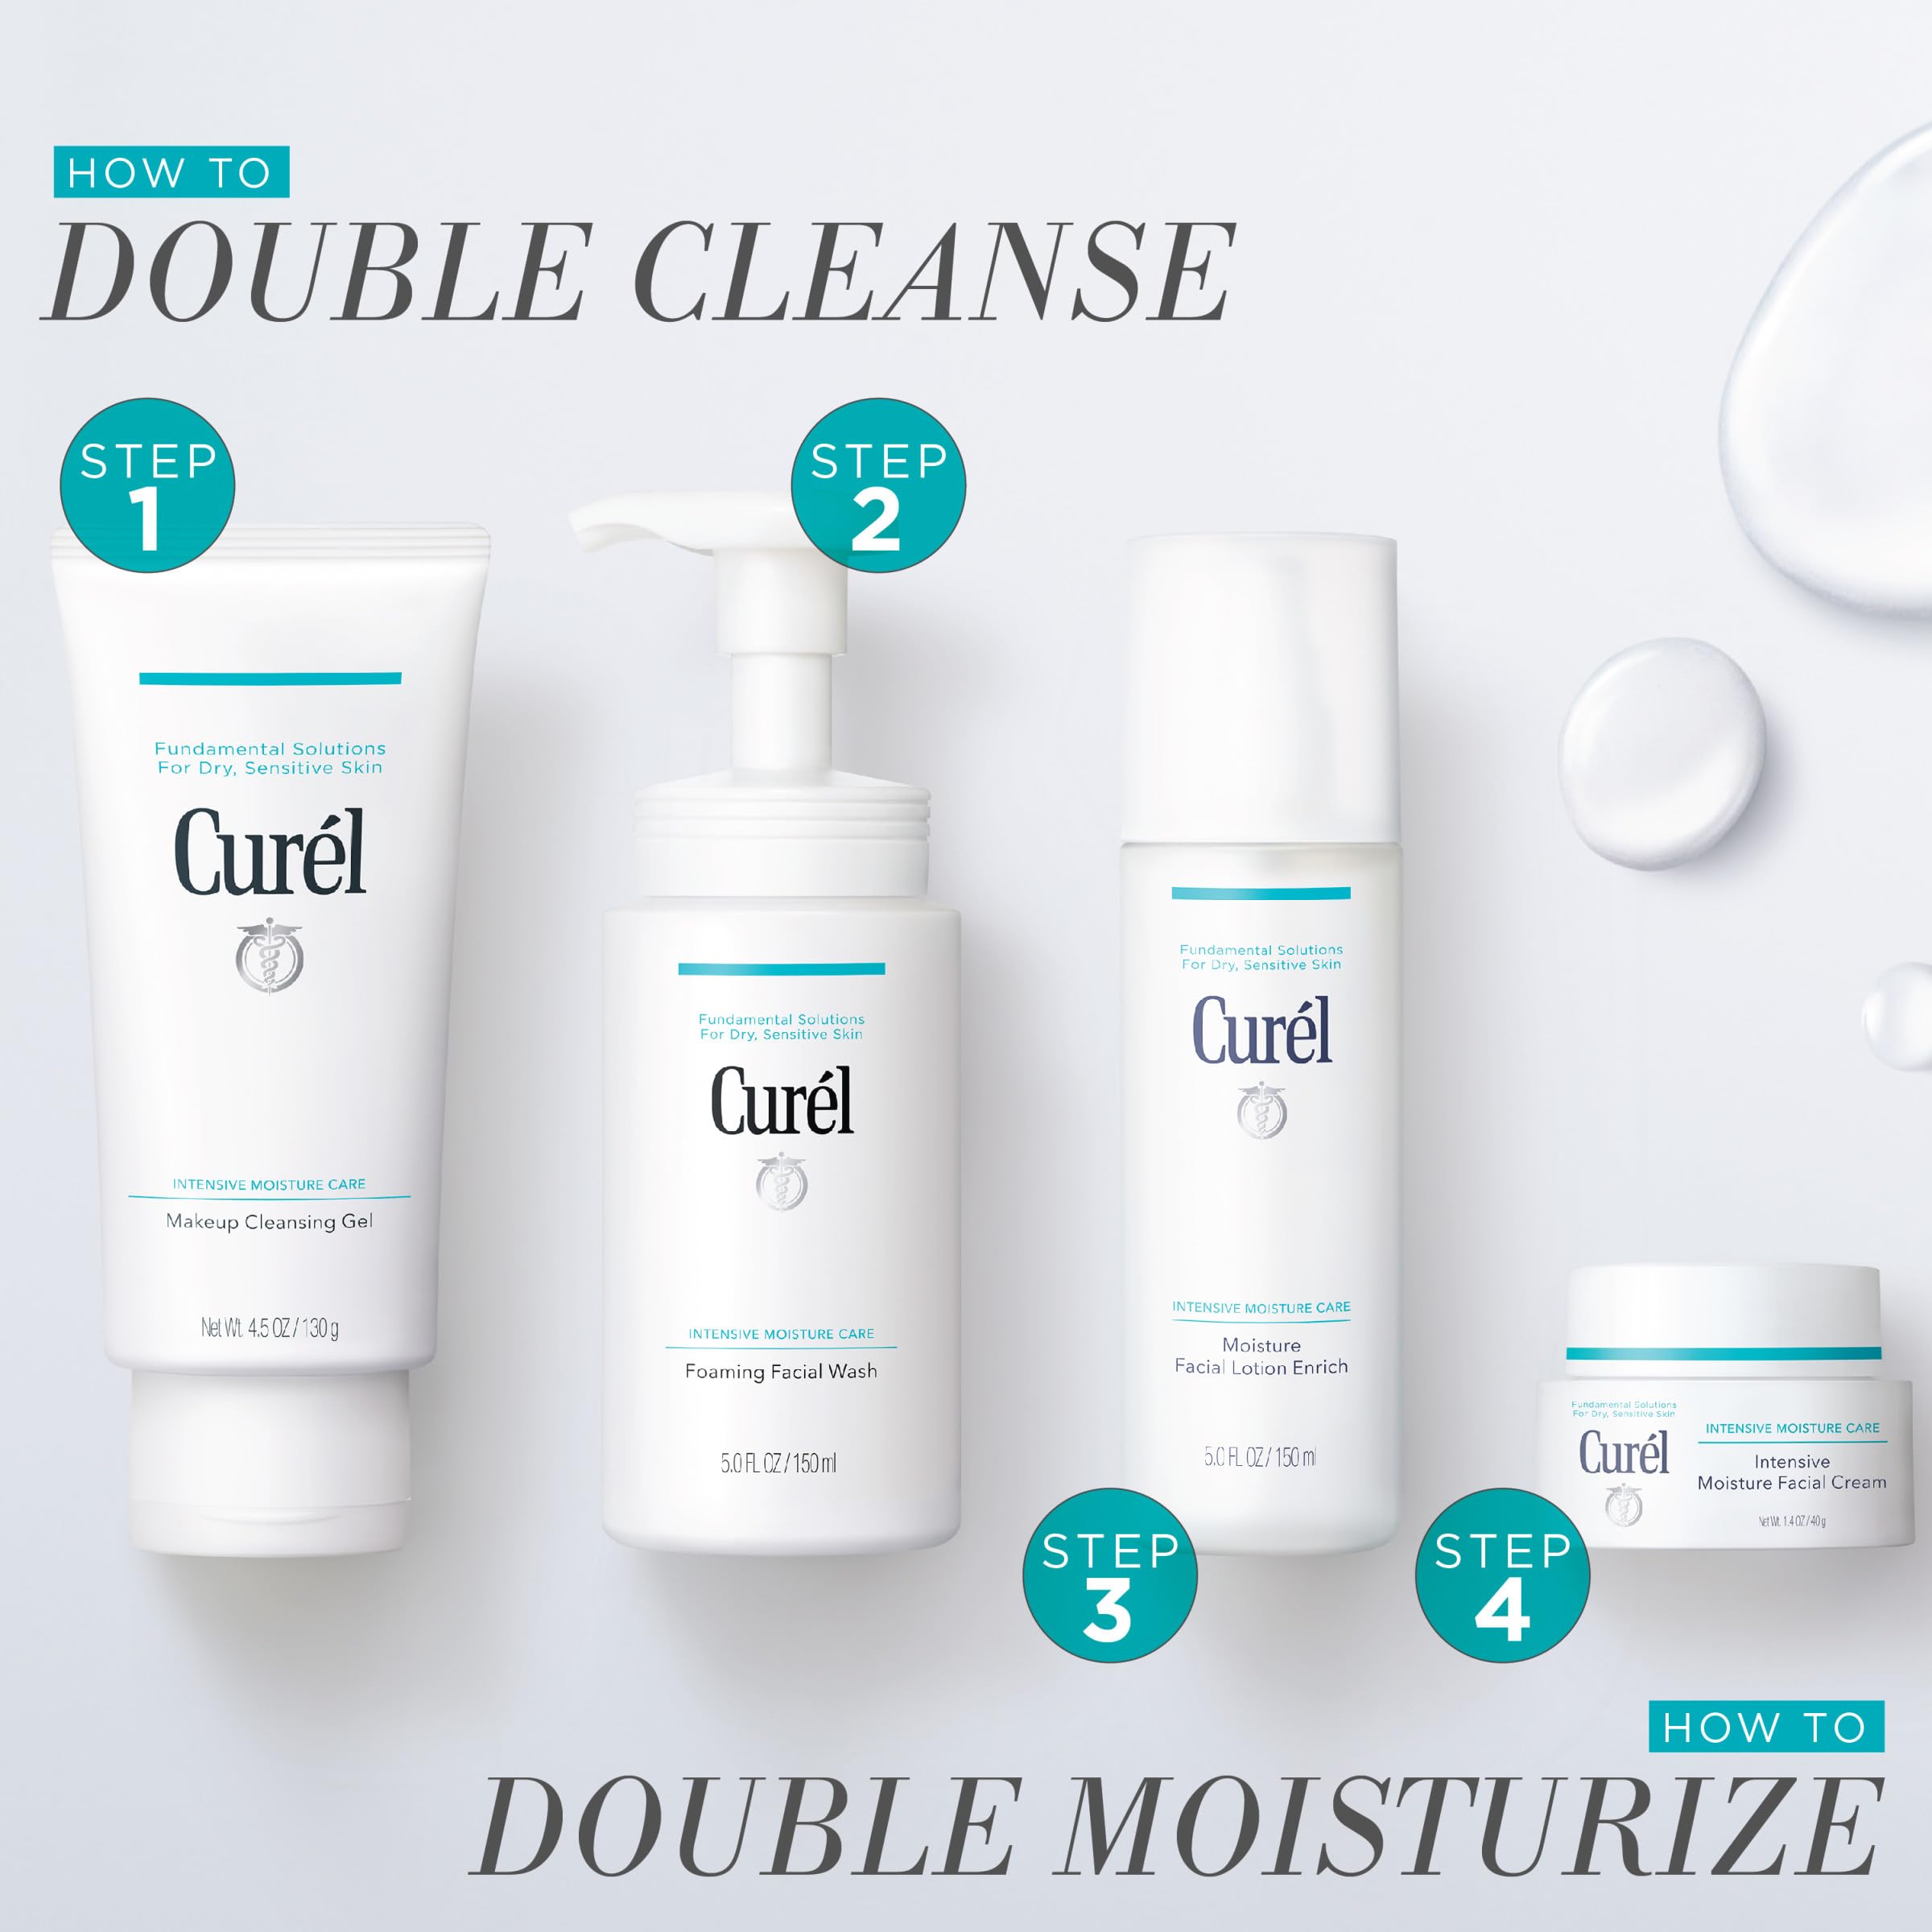 Curel Japanese Skin Care Travel Size Toiletries, for Dry, Sensitive Skin, Travel Size Face Wash, Travel Size Lotion, Travel Size Makeup Remove